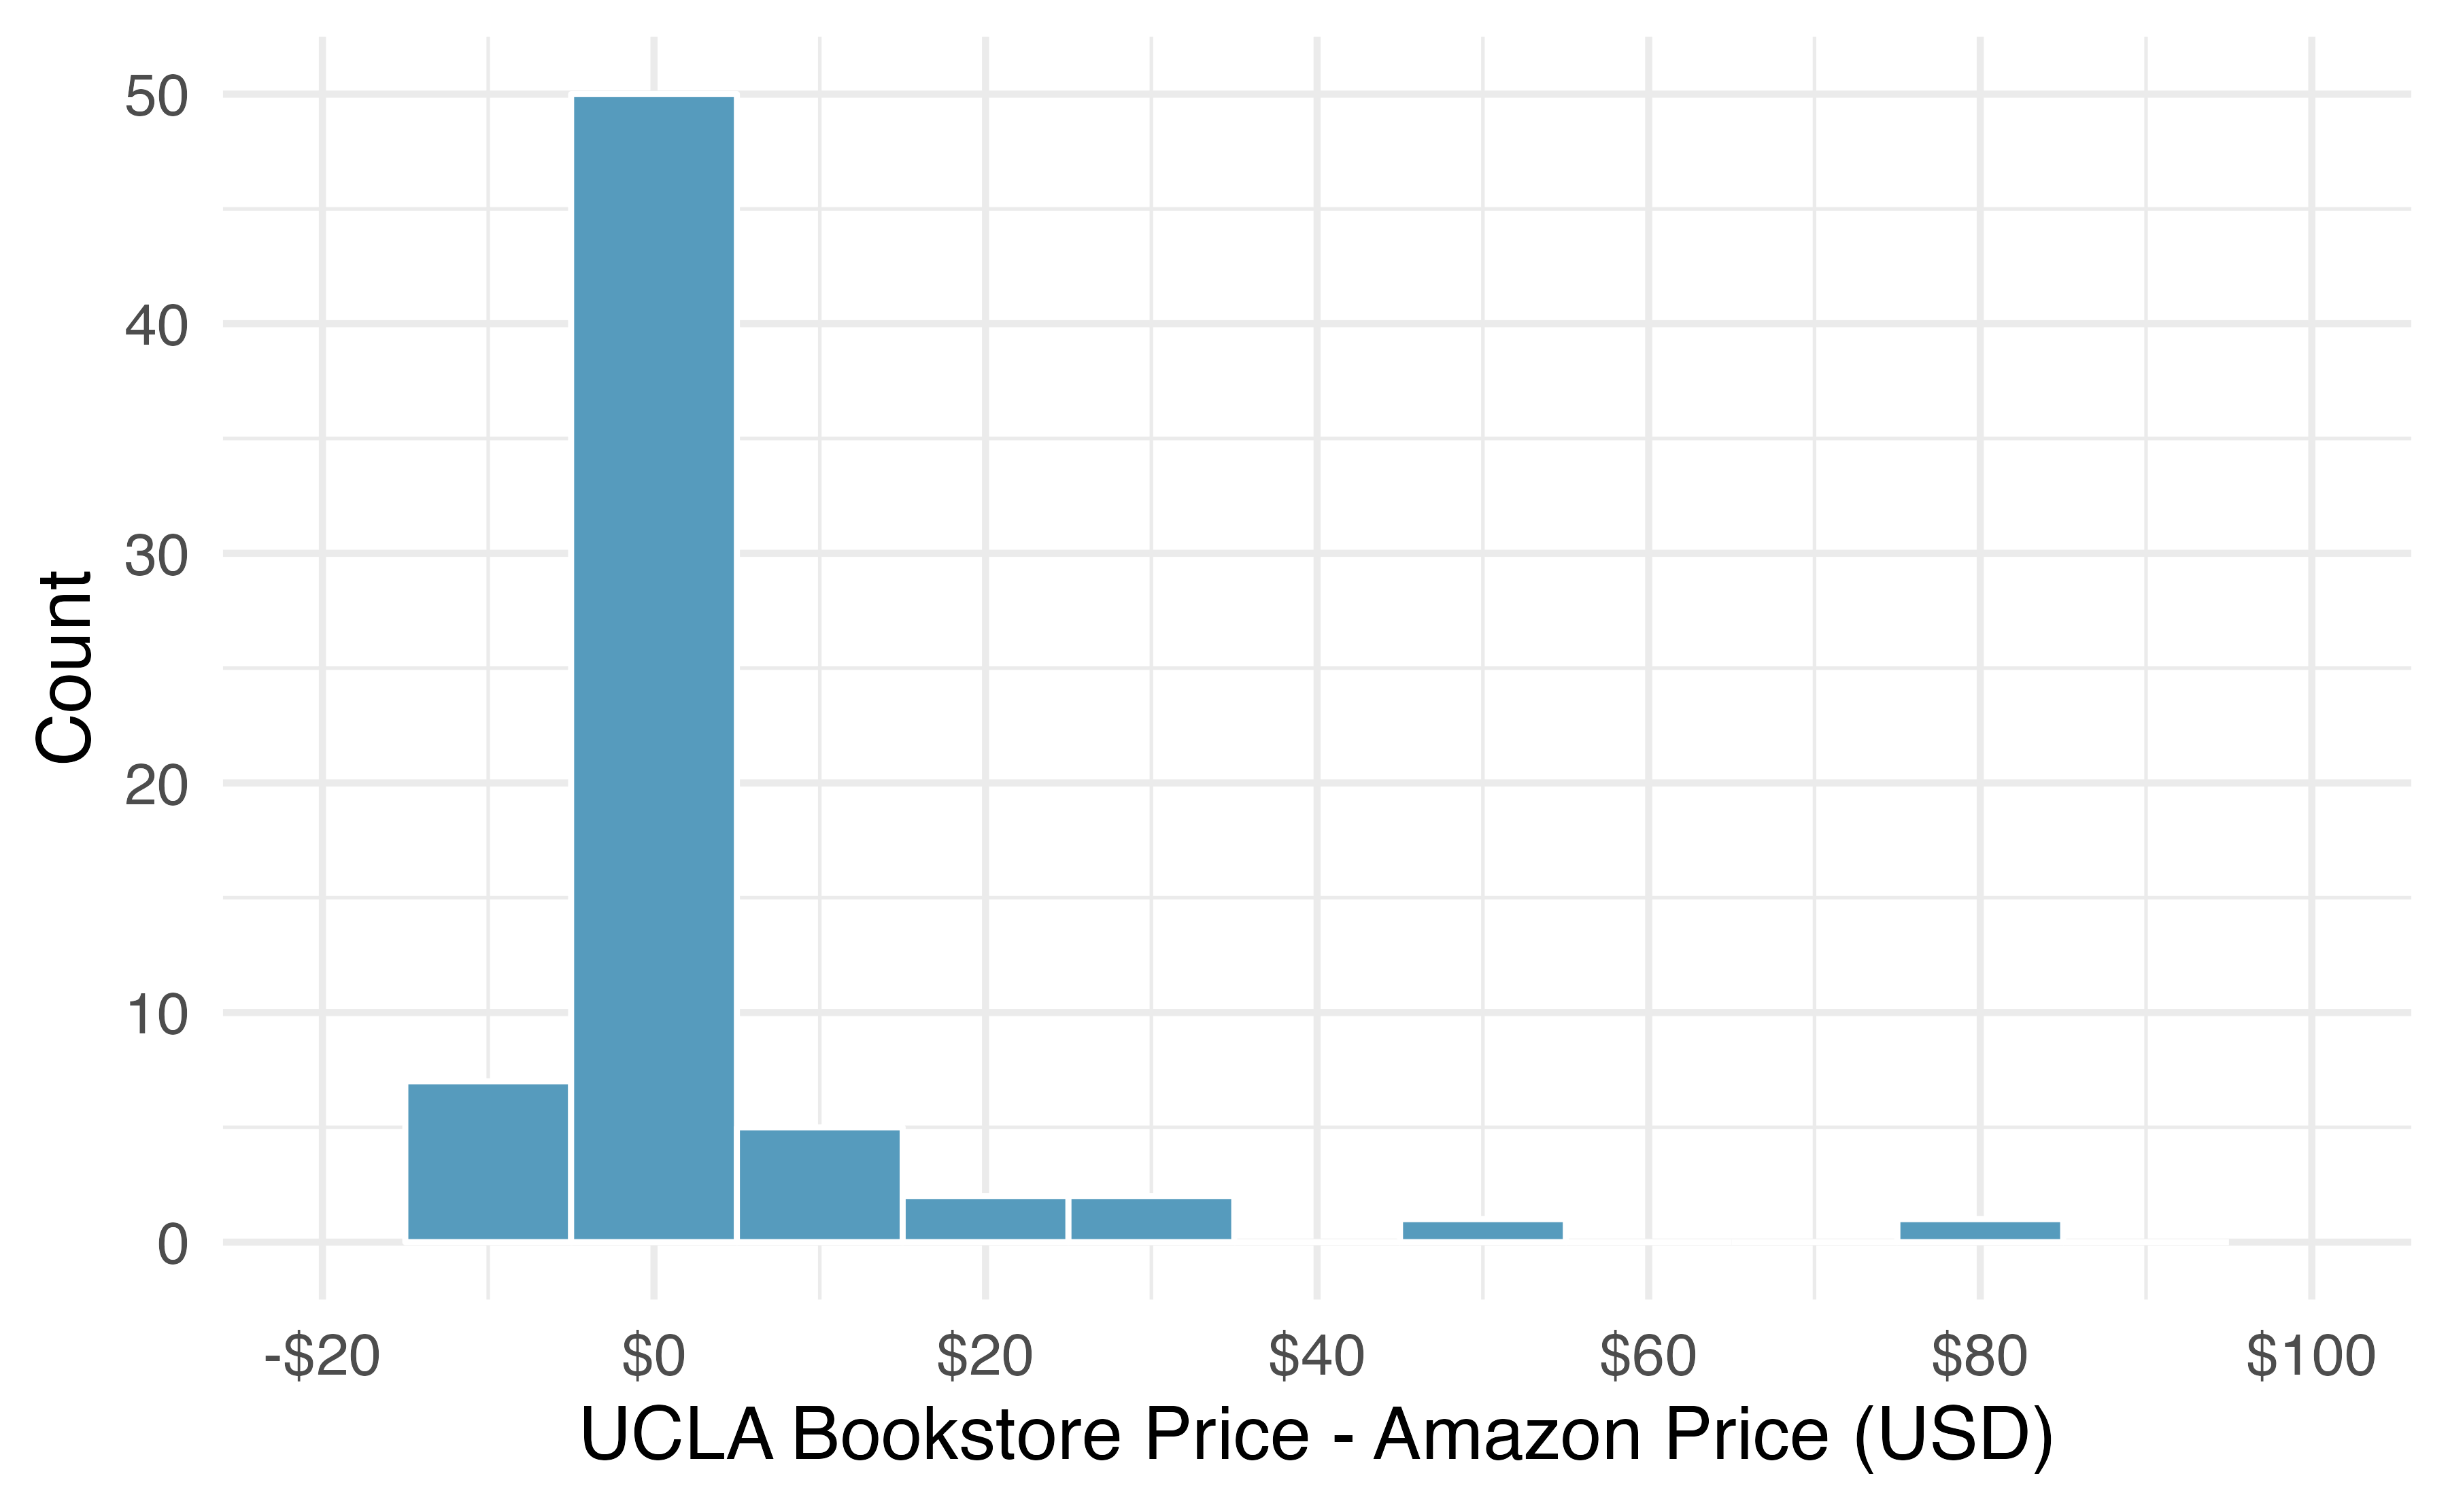 Histogram of the difference in price for each book sampled.